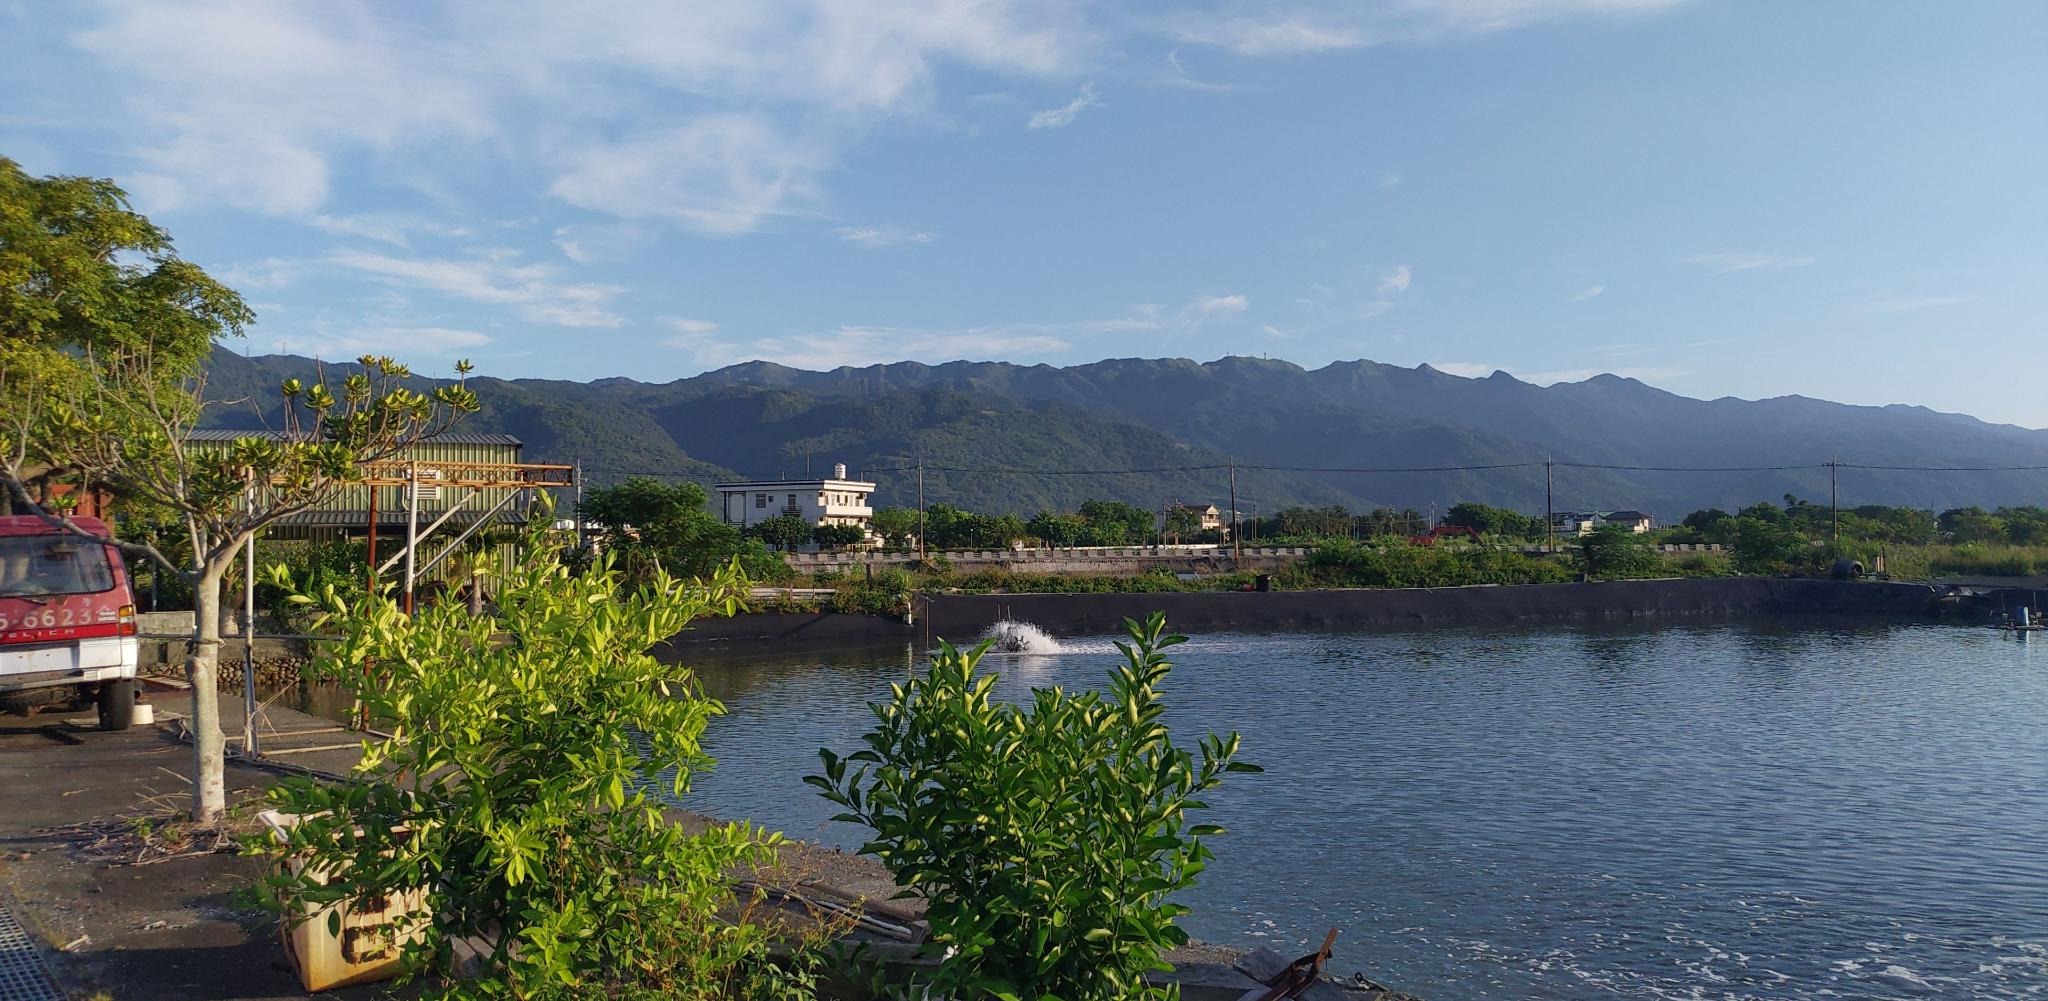 Landscape view from the Marine Research Station: fish pond in the foreground, green mountains in the background